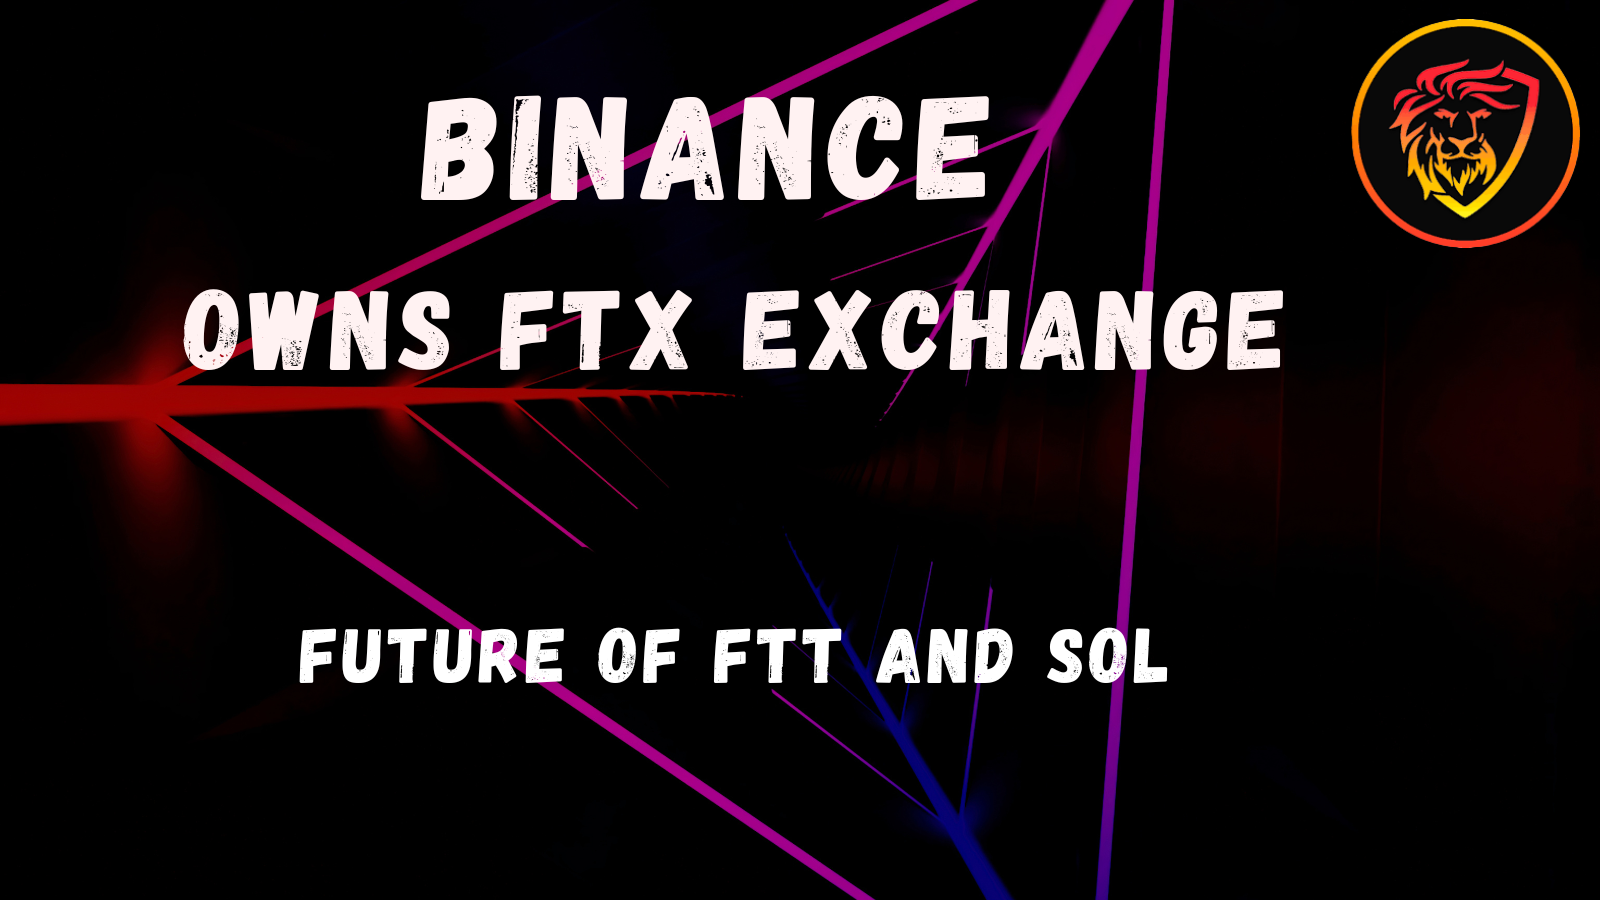 @idiosyncratic1/binance-opened-a-new-era-ftt-and-sol-at-risk